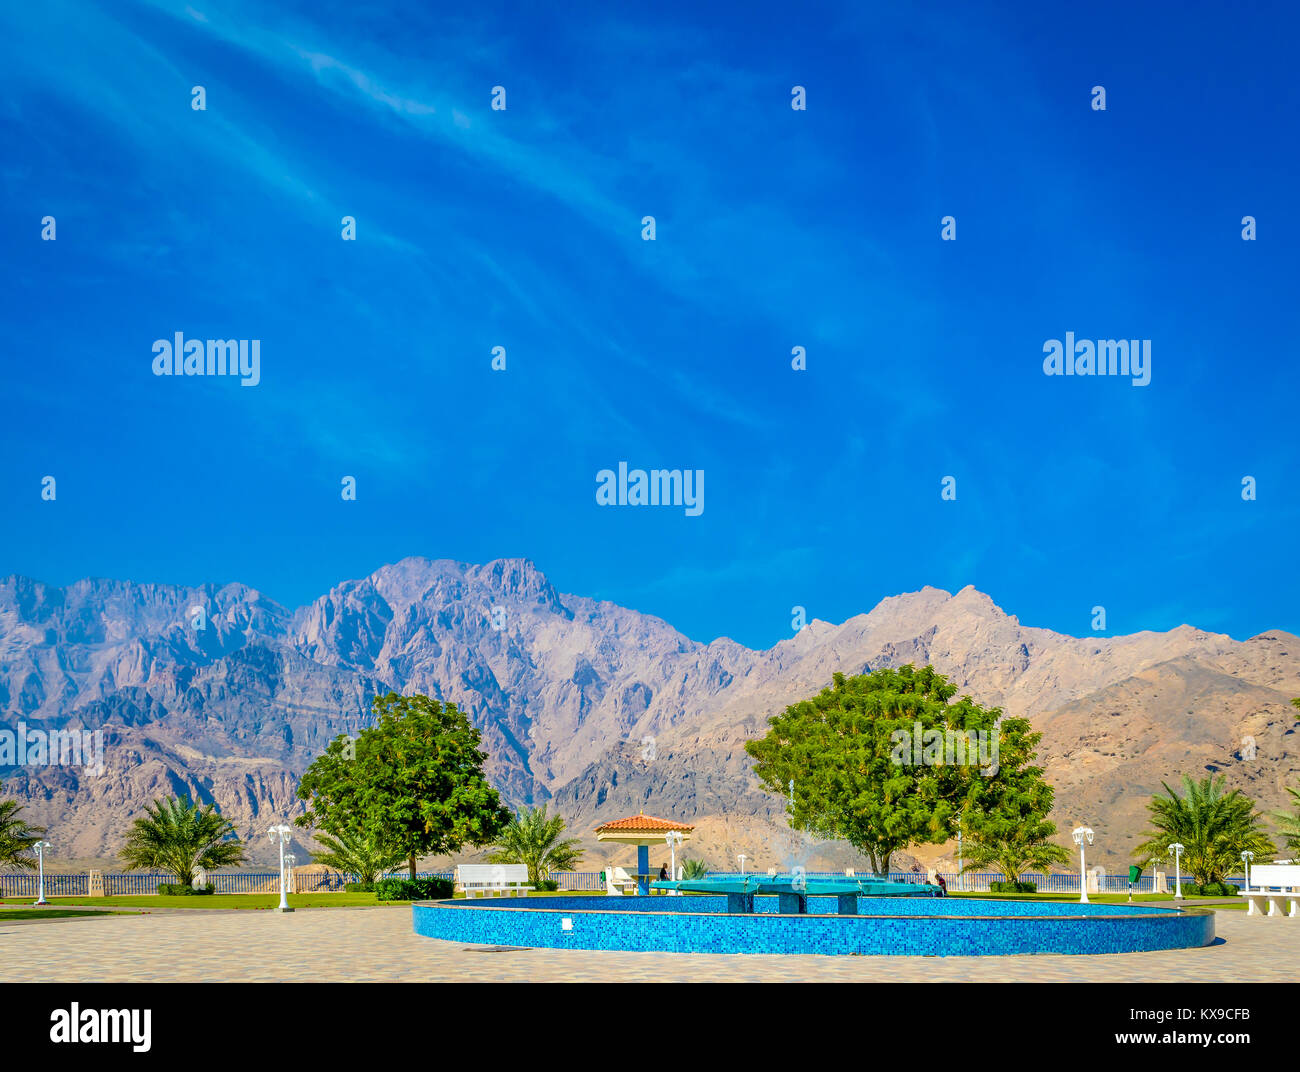 A perfect picnic spot with blue sky, greenery and mountains. On a bright, sunny day in Muscat, Oman. Stock Photo